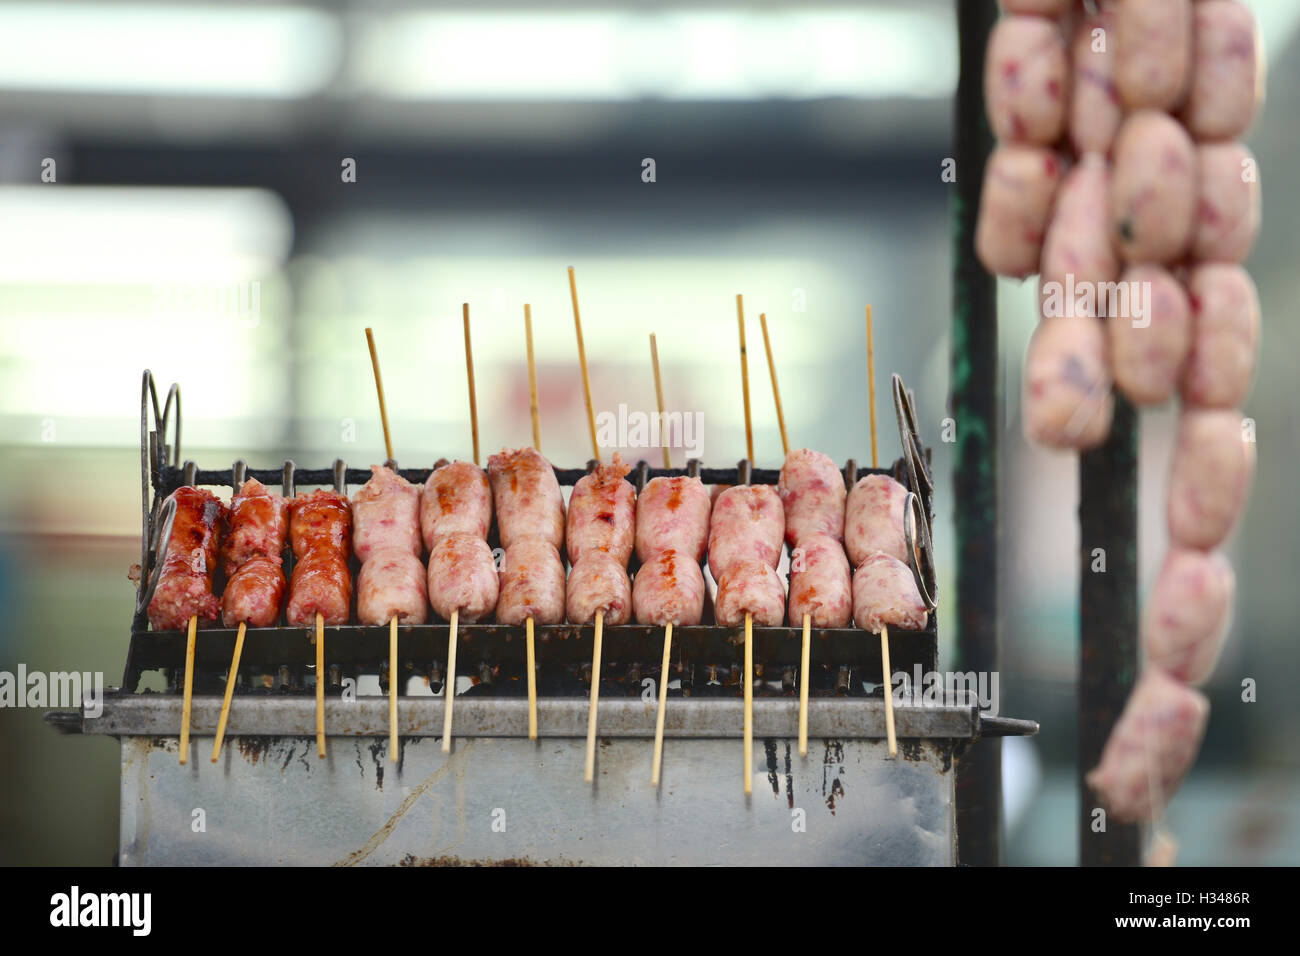 Pork sausages barbecued Stock Photo